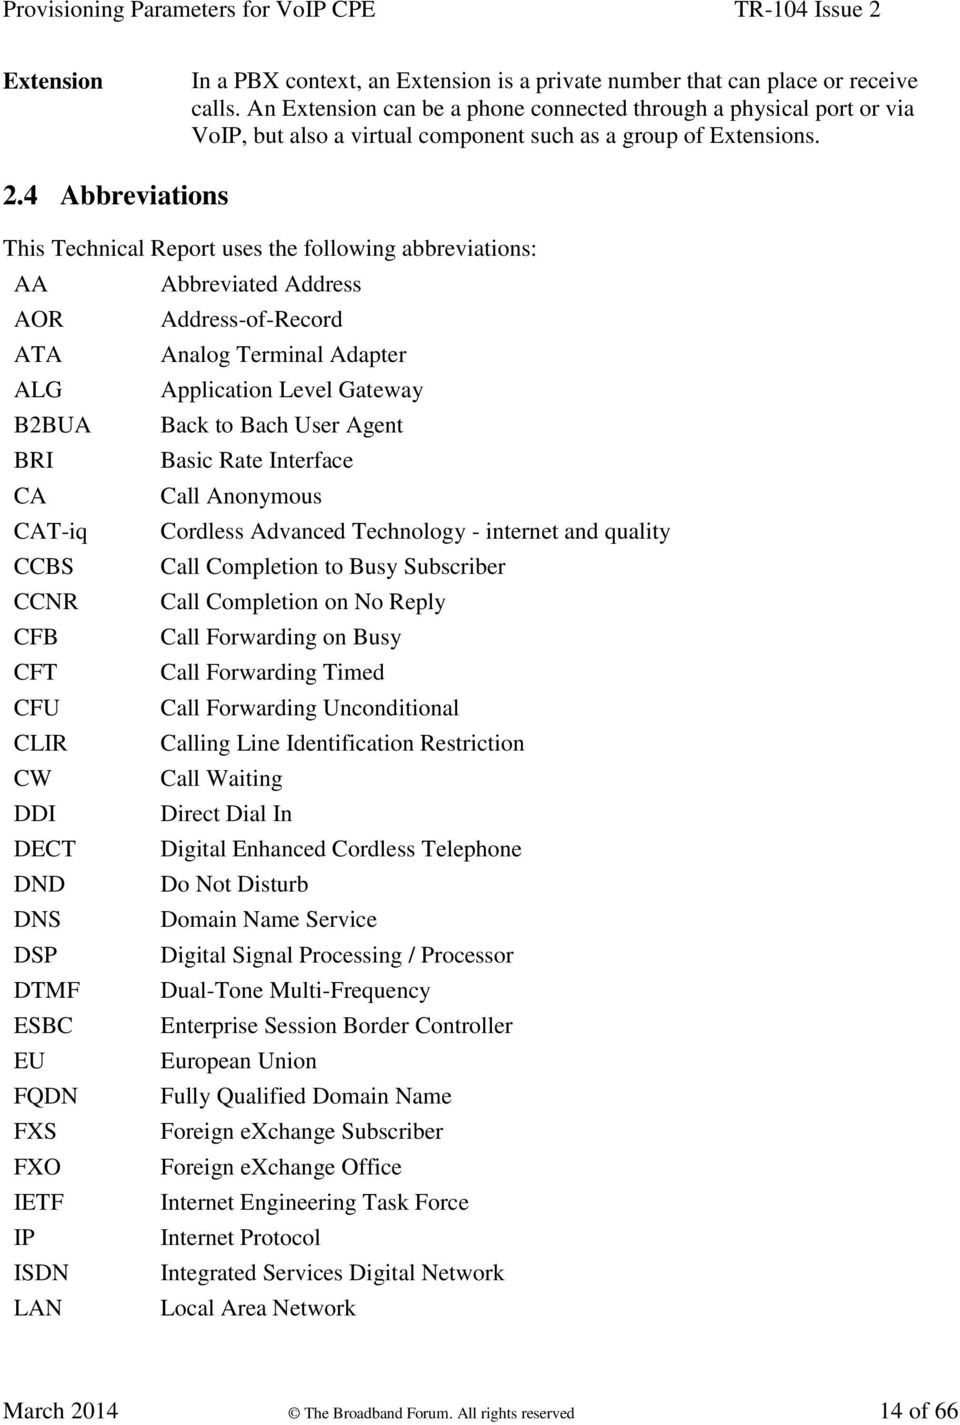 4 Abbreviations This Technical Report uses the following abbreviations: AA Abbreviated Address AOR Address-of-Record ATA Analog Terminal Adapter ALG Application Level Gateway B2BUA Back to Bach User